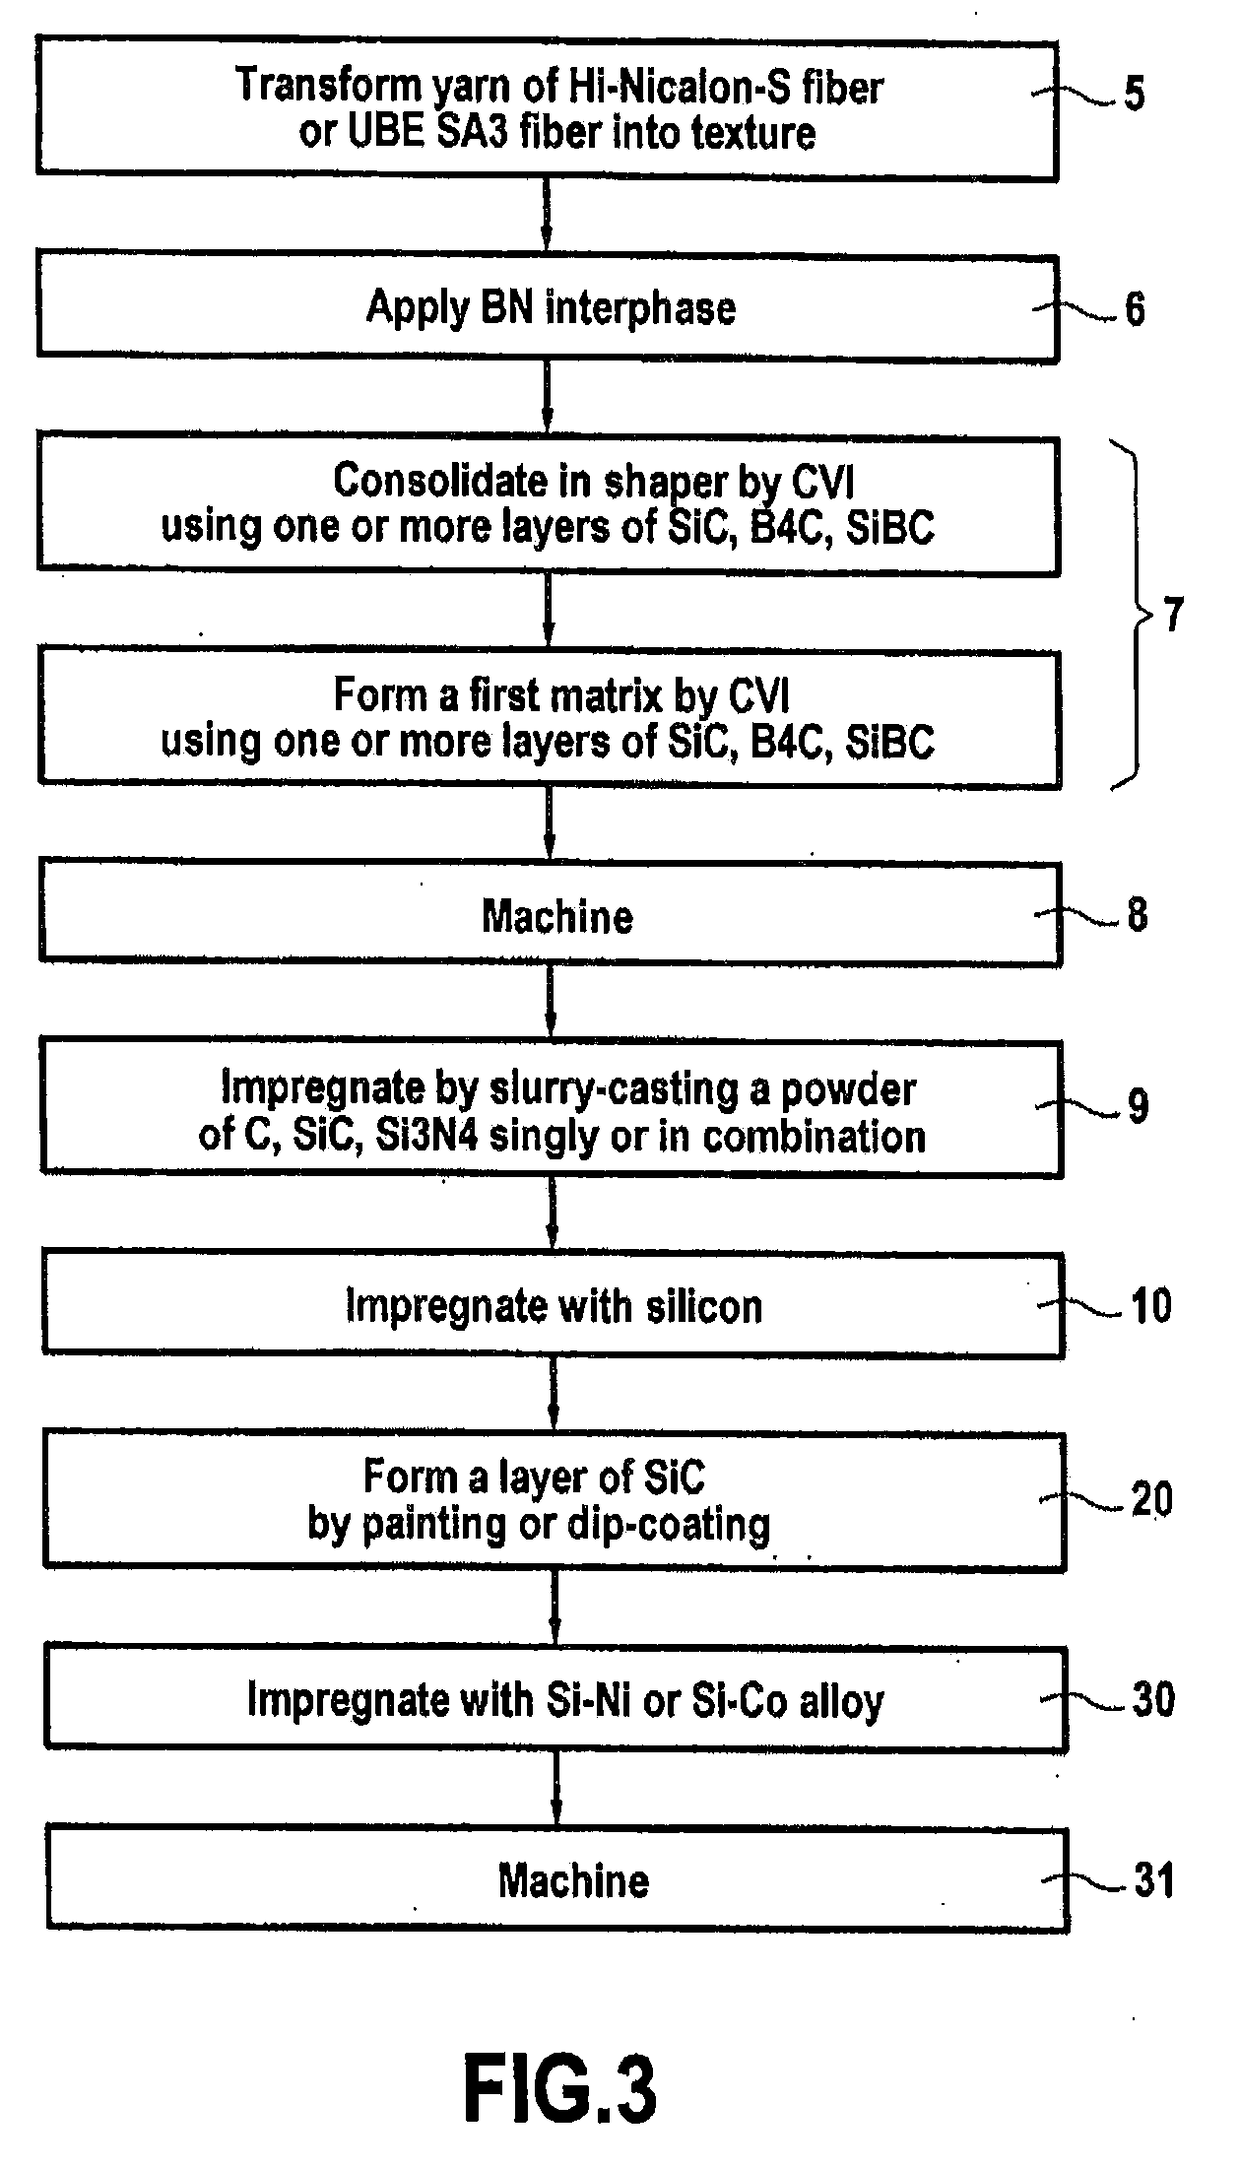 Part coated with a surface coating and associated methods